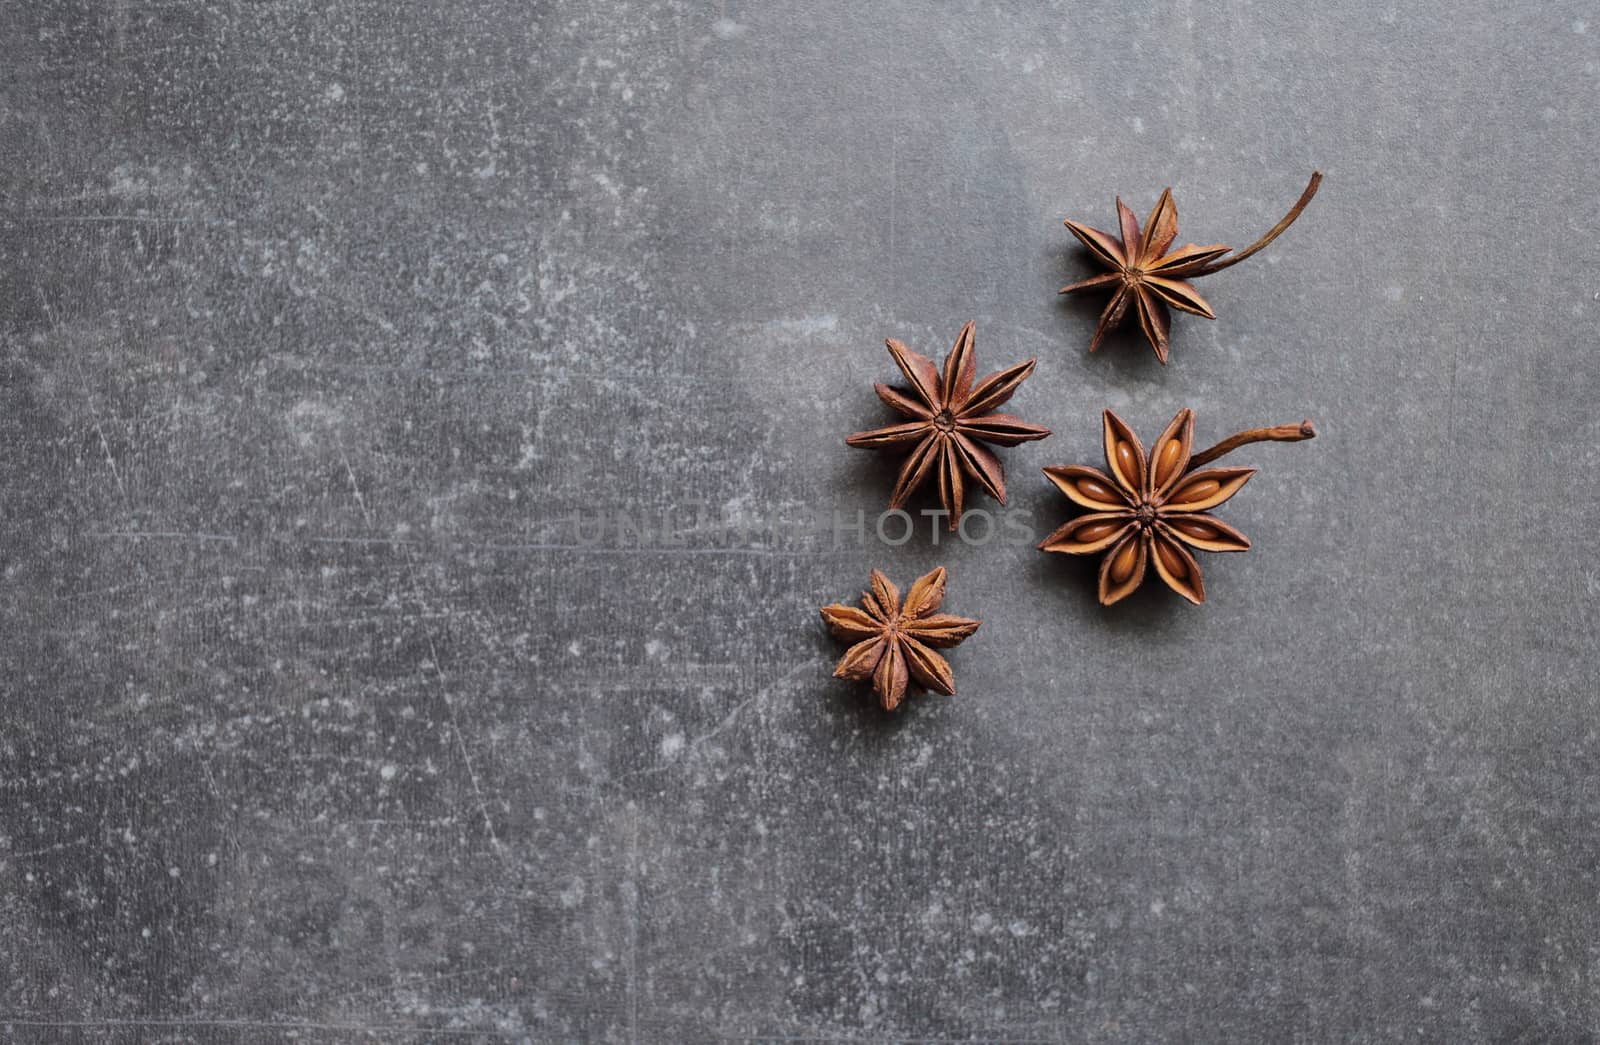 Fragrant star anise stars on a gray concrete countertop by selinsmo